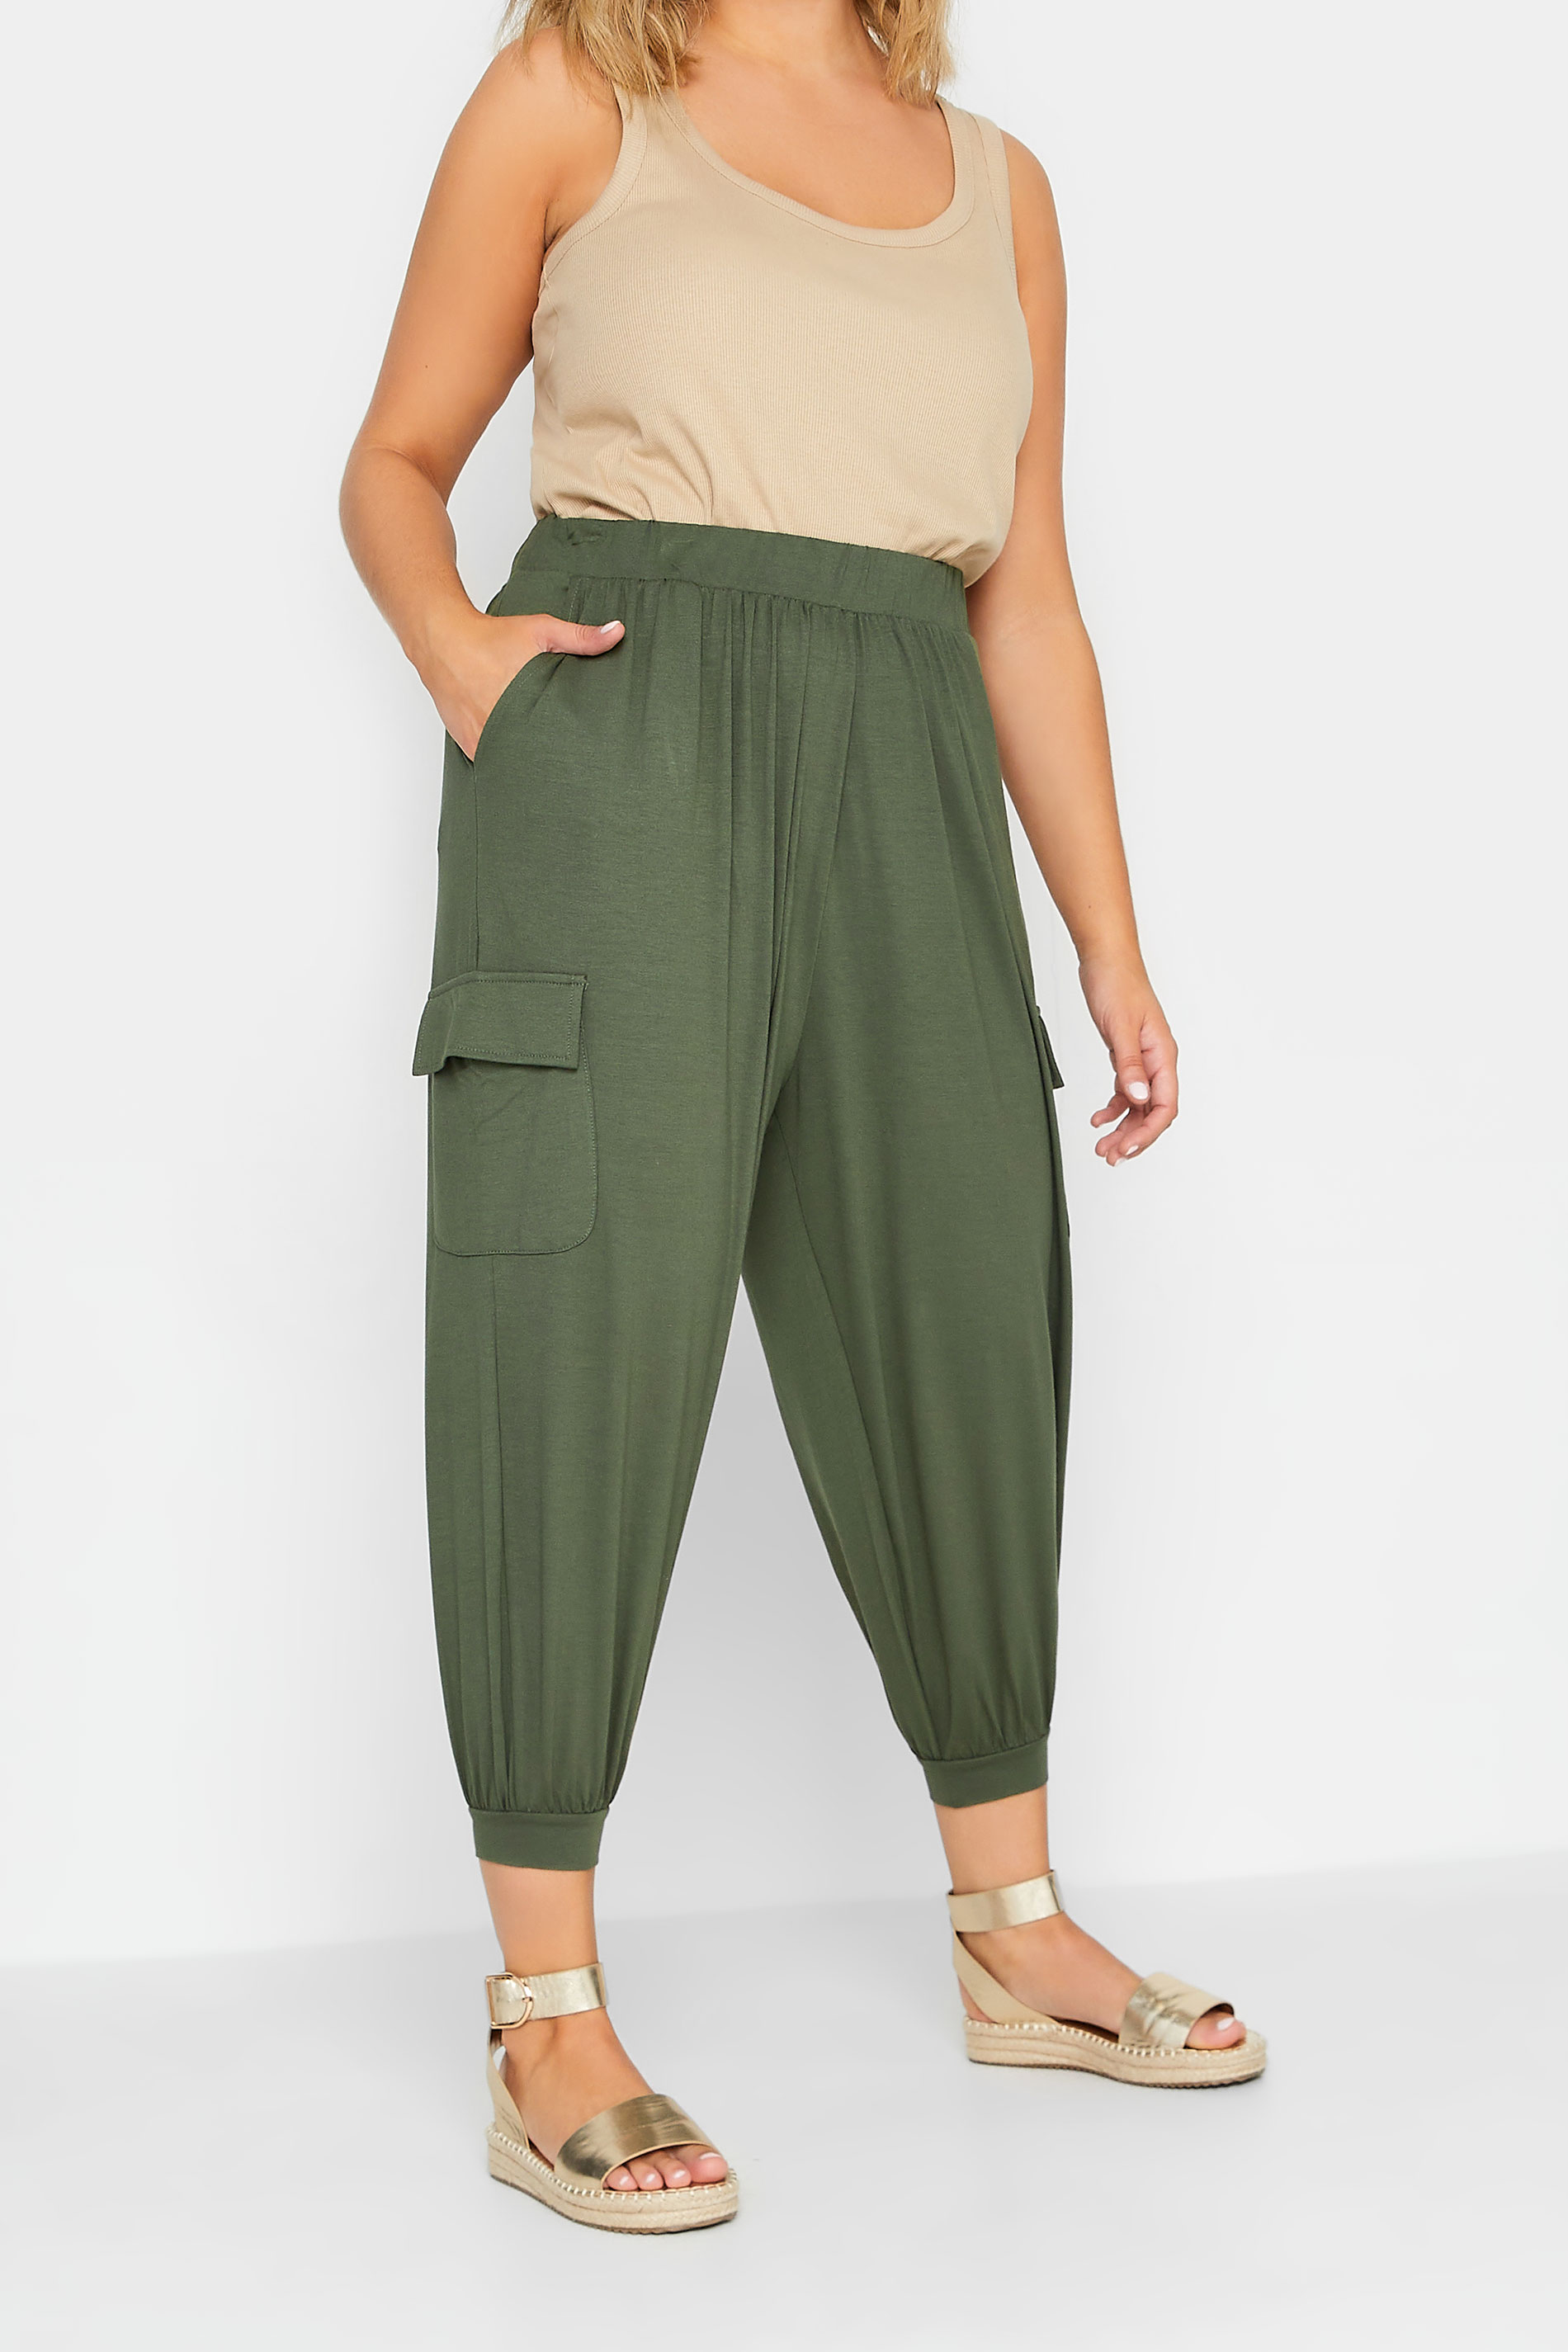 YOURS Curve Plus Size Khaki Green Harem Cropped Joggers | Yours Clothing  1